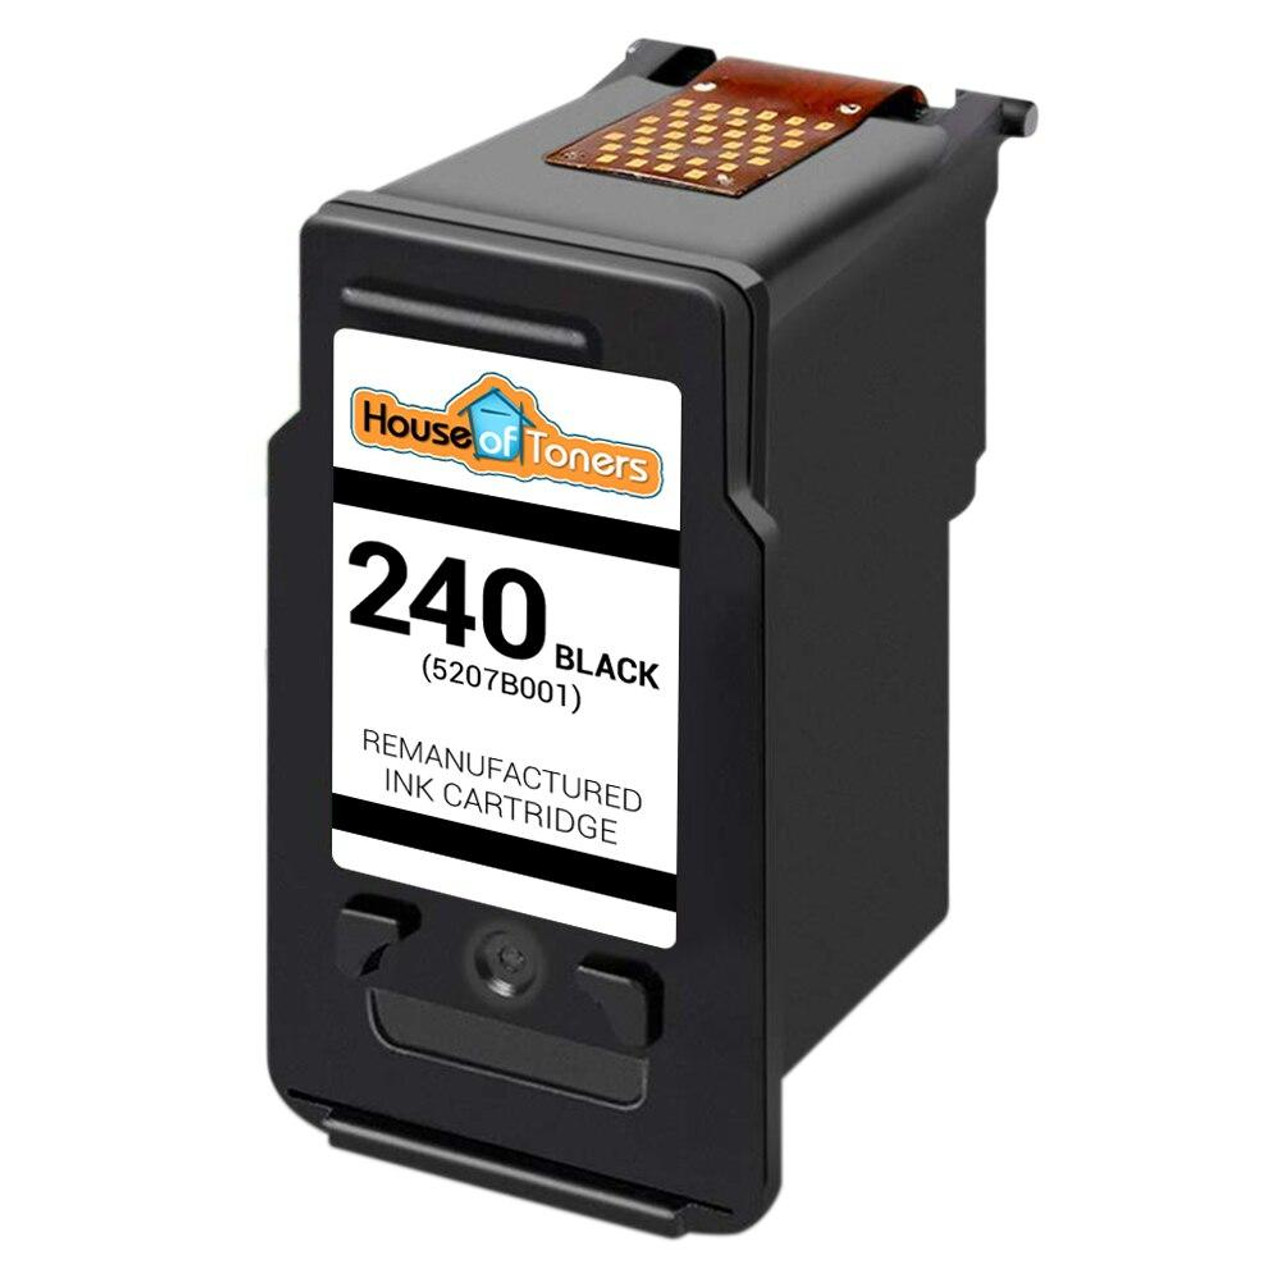 Remanufactured Ink Cartridge for Canon PG-240 (5207B001) Black  Houseoftoners